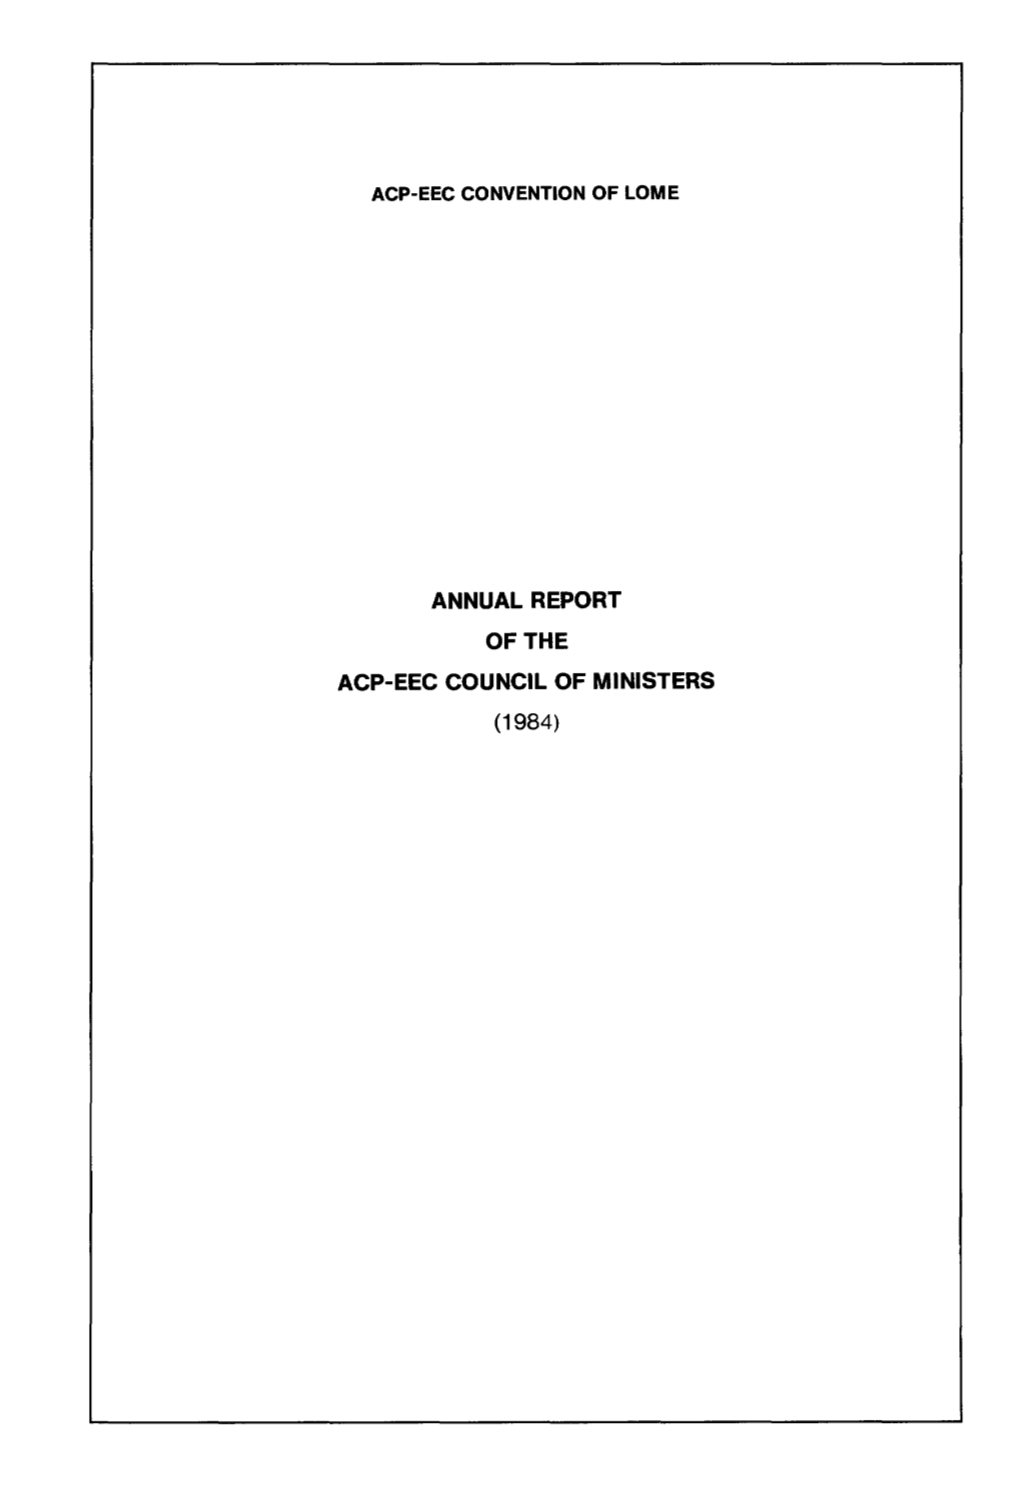 Annual Report of the Acp-Eec Council of Ministers (1984) Convention Acp- Cee De Lome Acp-Eec Convention of Lome